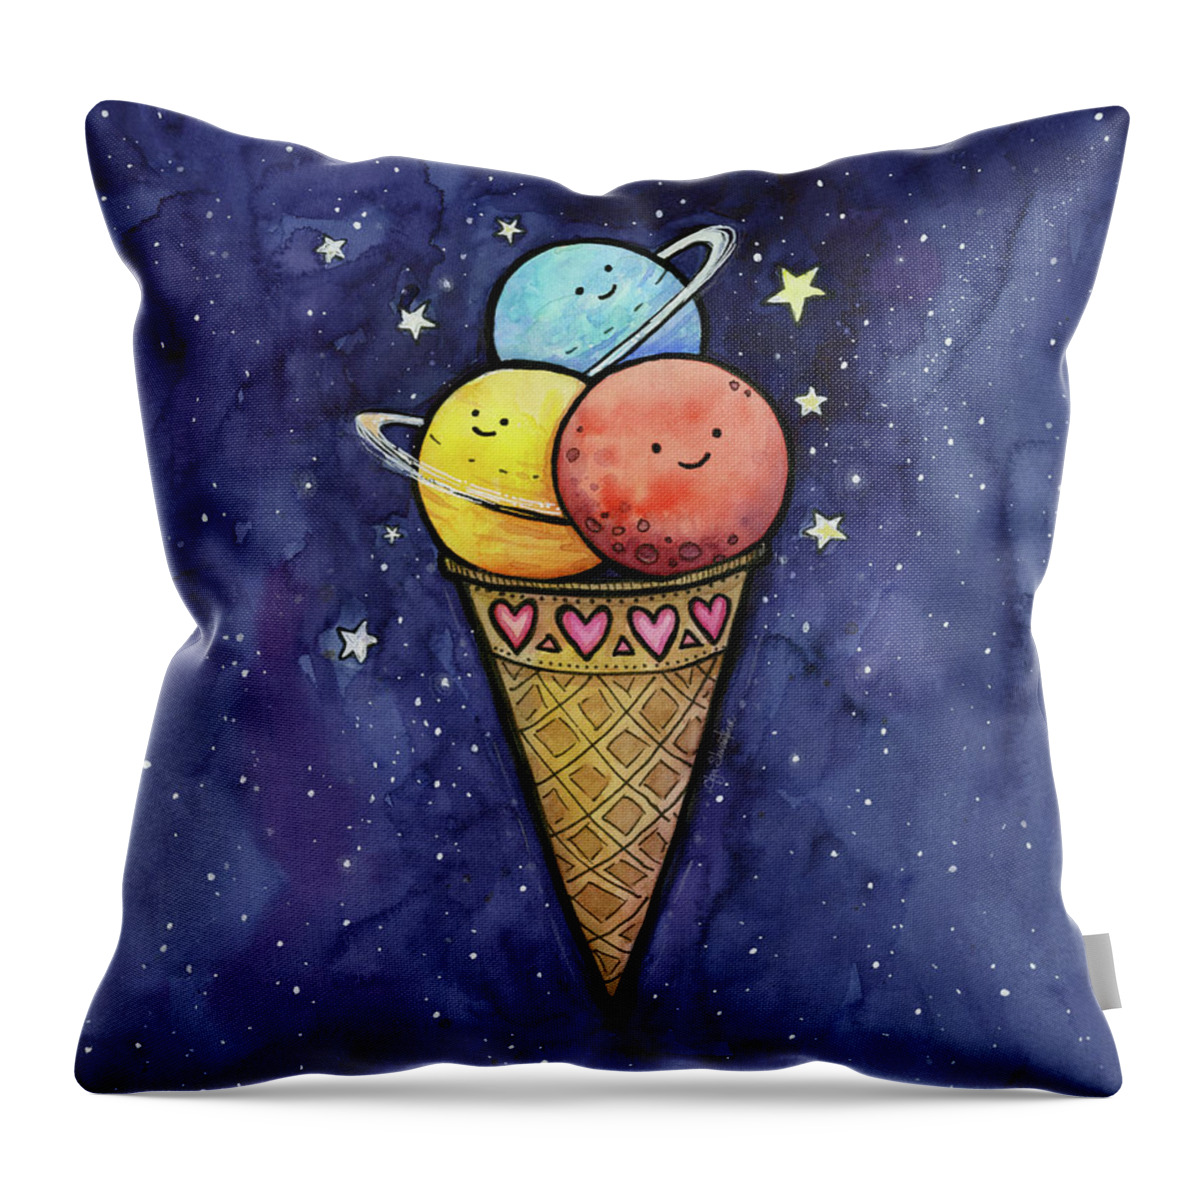 Space Throw Pillow featuring the painting Space Ice Cream by Olga Shvartsur